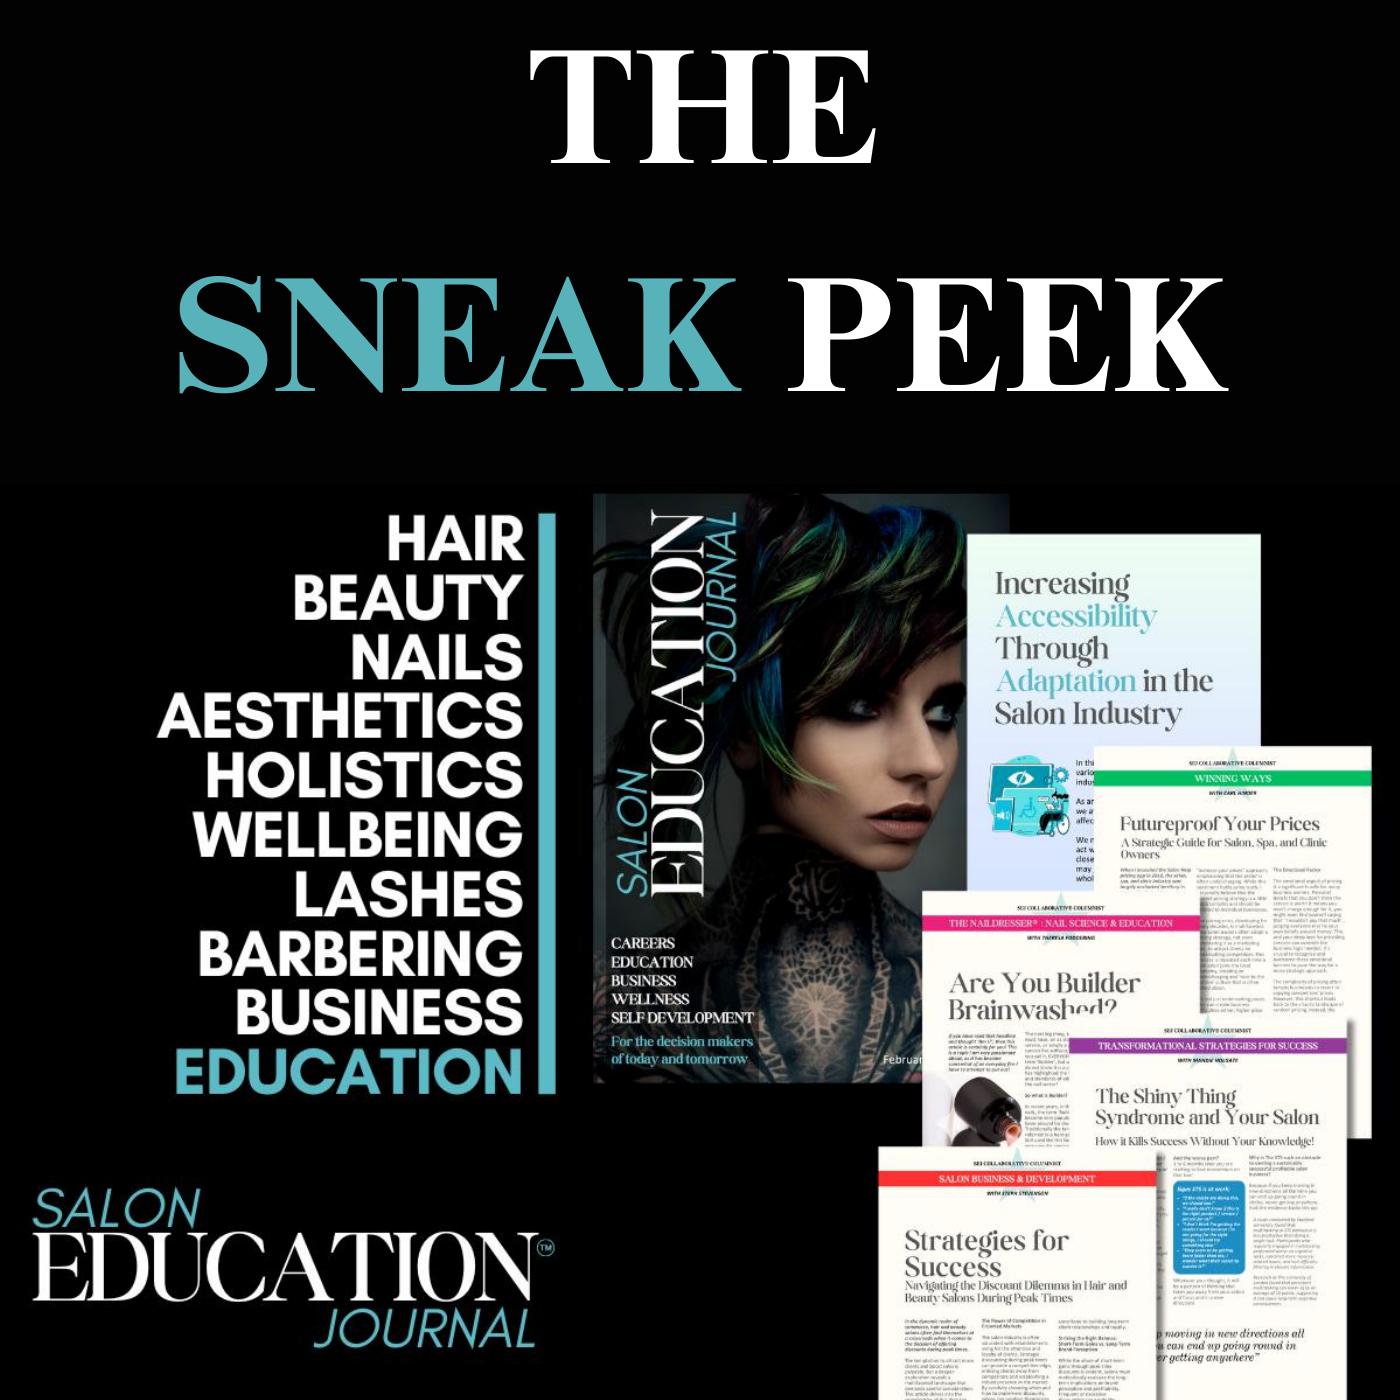 Salon Education Journal image showing Sneak Peek of this issue and a click through link